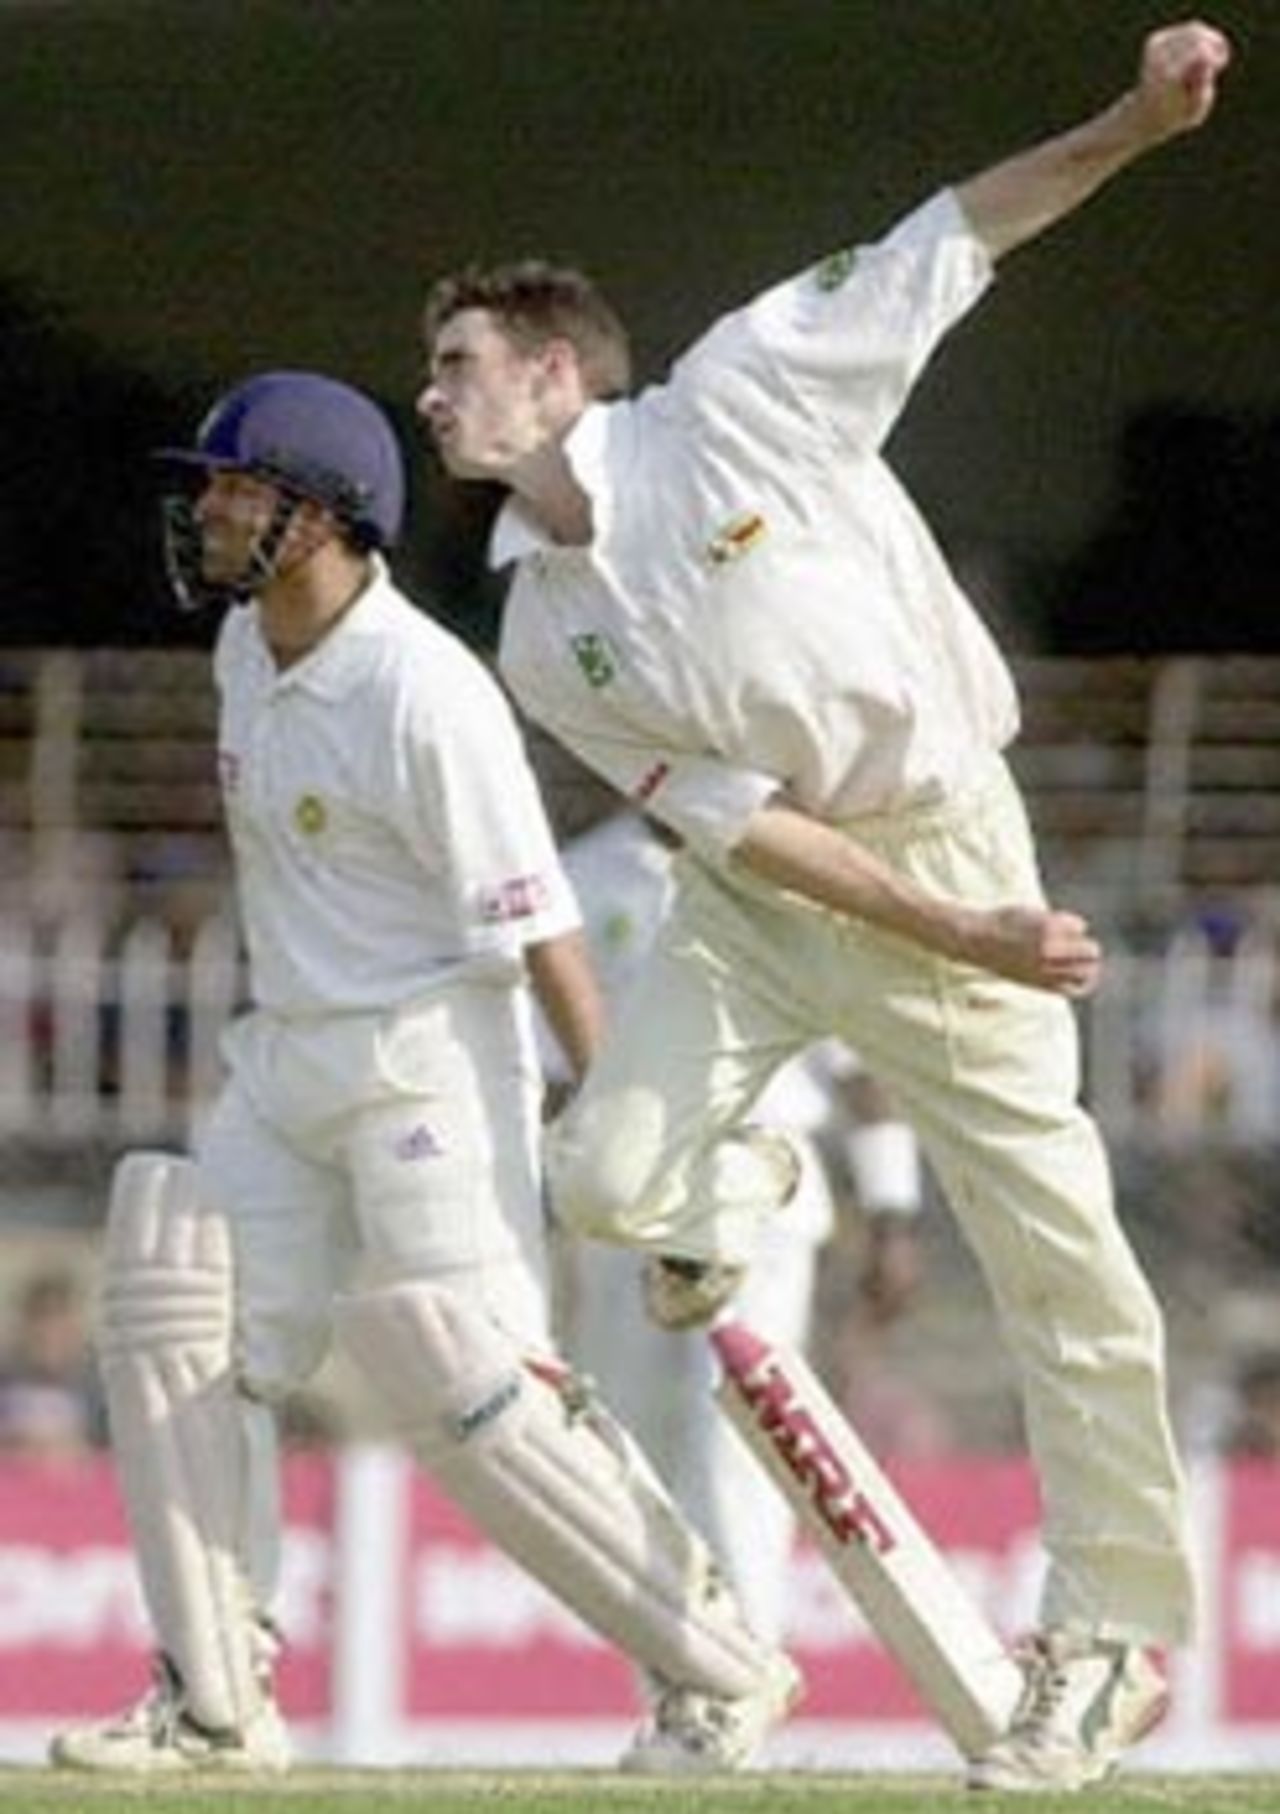 Zimbabwean spinner Brian Murphy bowls to Indian batsman Sunil Joshi as Indian batsman Sachin Tendulkar (L, behind) on the non-strikers end looks on during the second day of the second Test match between India and Zimbabwe, 26 November 2000 in Nagpur . Murphy took two wickets for Zimbabwe to be the highest wicket taker for his team along with team-mate Grant Flower. Zimbabwe finished the day at 59 for 1 in reply to India's total of 609.